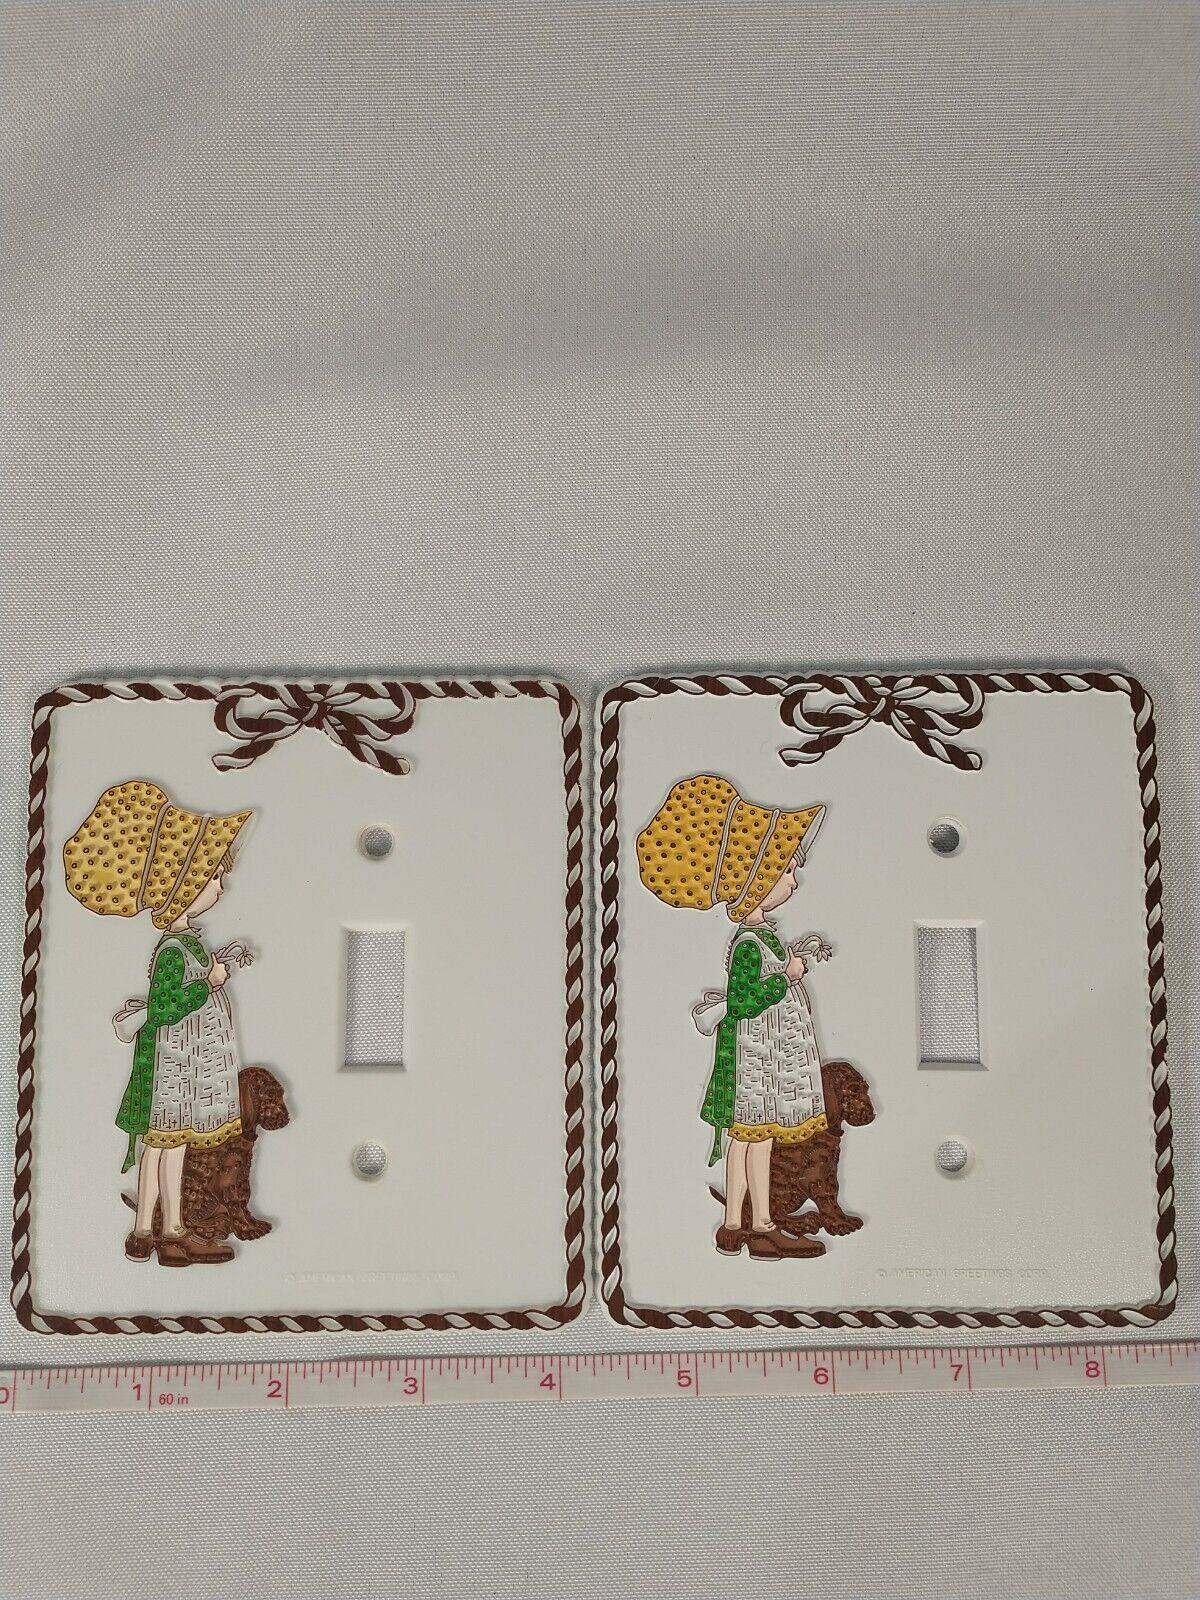 Vintage 1973 Holly Hobbies Switch Plate Cover, American Greetings Corp Set Of 2